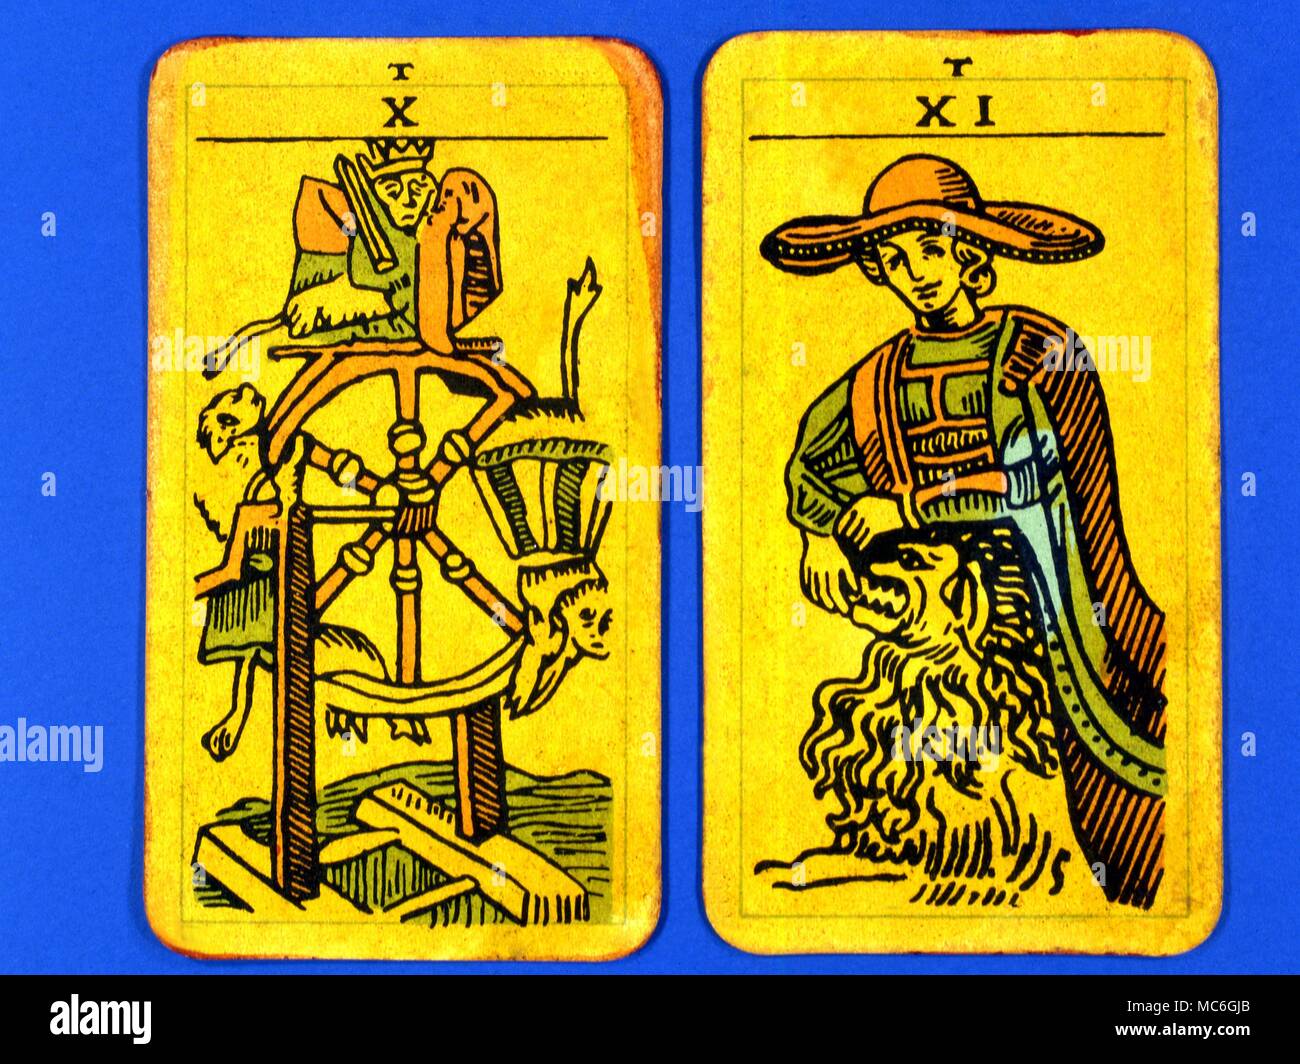 Tarot Cards-Majo Arcana- The Parisian Tarot. Card 10. The Wheel of Fortune, and Card 11. The Strength. Two cards from a Major Arcana picture Tarot,adapted by a Wiccan group. Probably designed in an archaizing style in loose imitation of the Rosicrucian deck designed by Pamela Coleman Smith, alongside A.E.Waite, and various earlier decks, such as that published by Encausse (Papus) in The Tarot of the Bohemians at the end of the 19th century, post 1905, but earlier than 1912. The name Parisian Tarot was given by the owner of the deck - it might however be called the Tau Tarot, from the intrigui Stock Photo